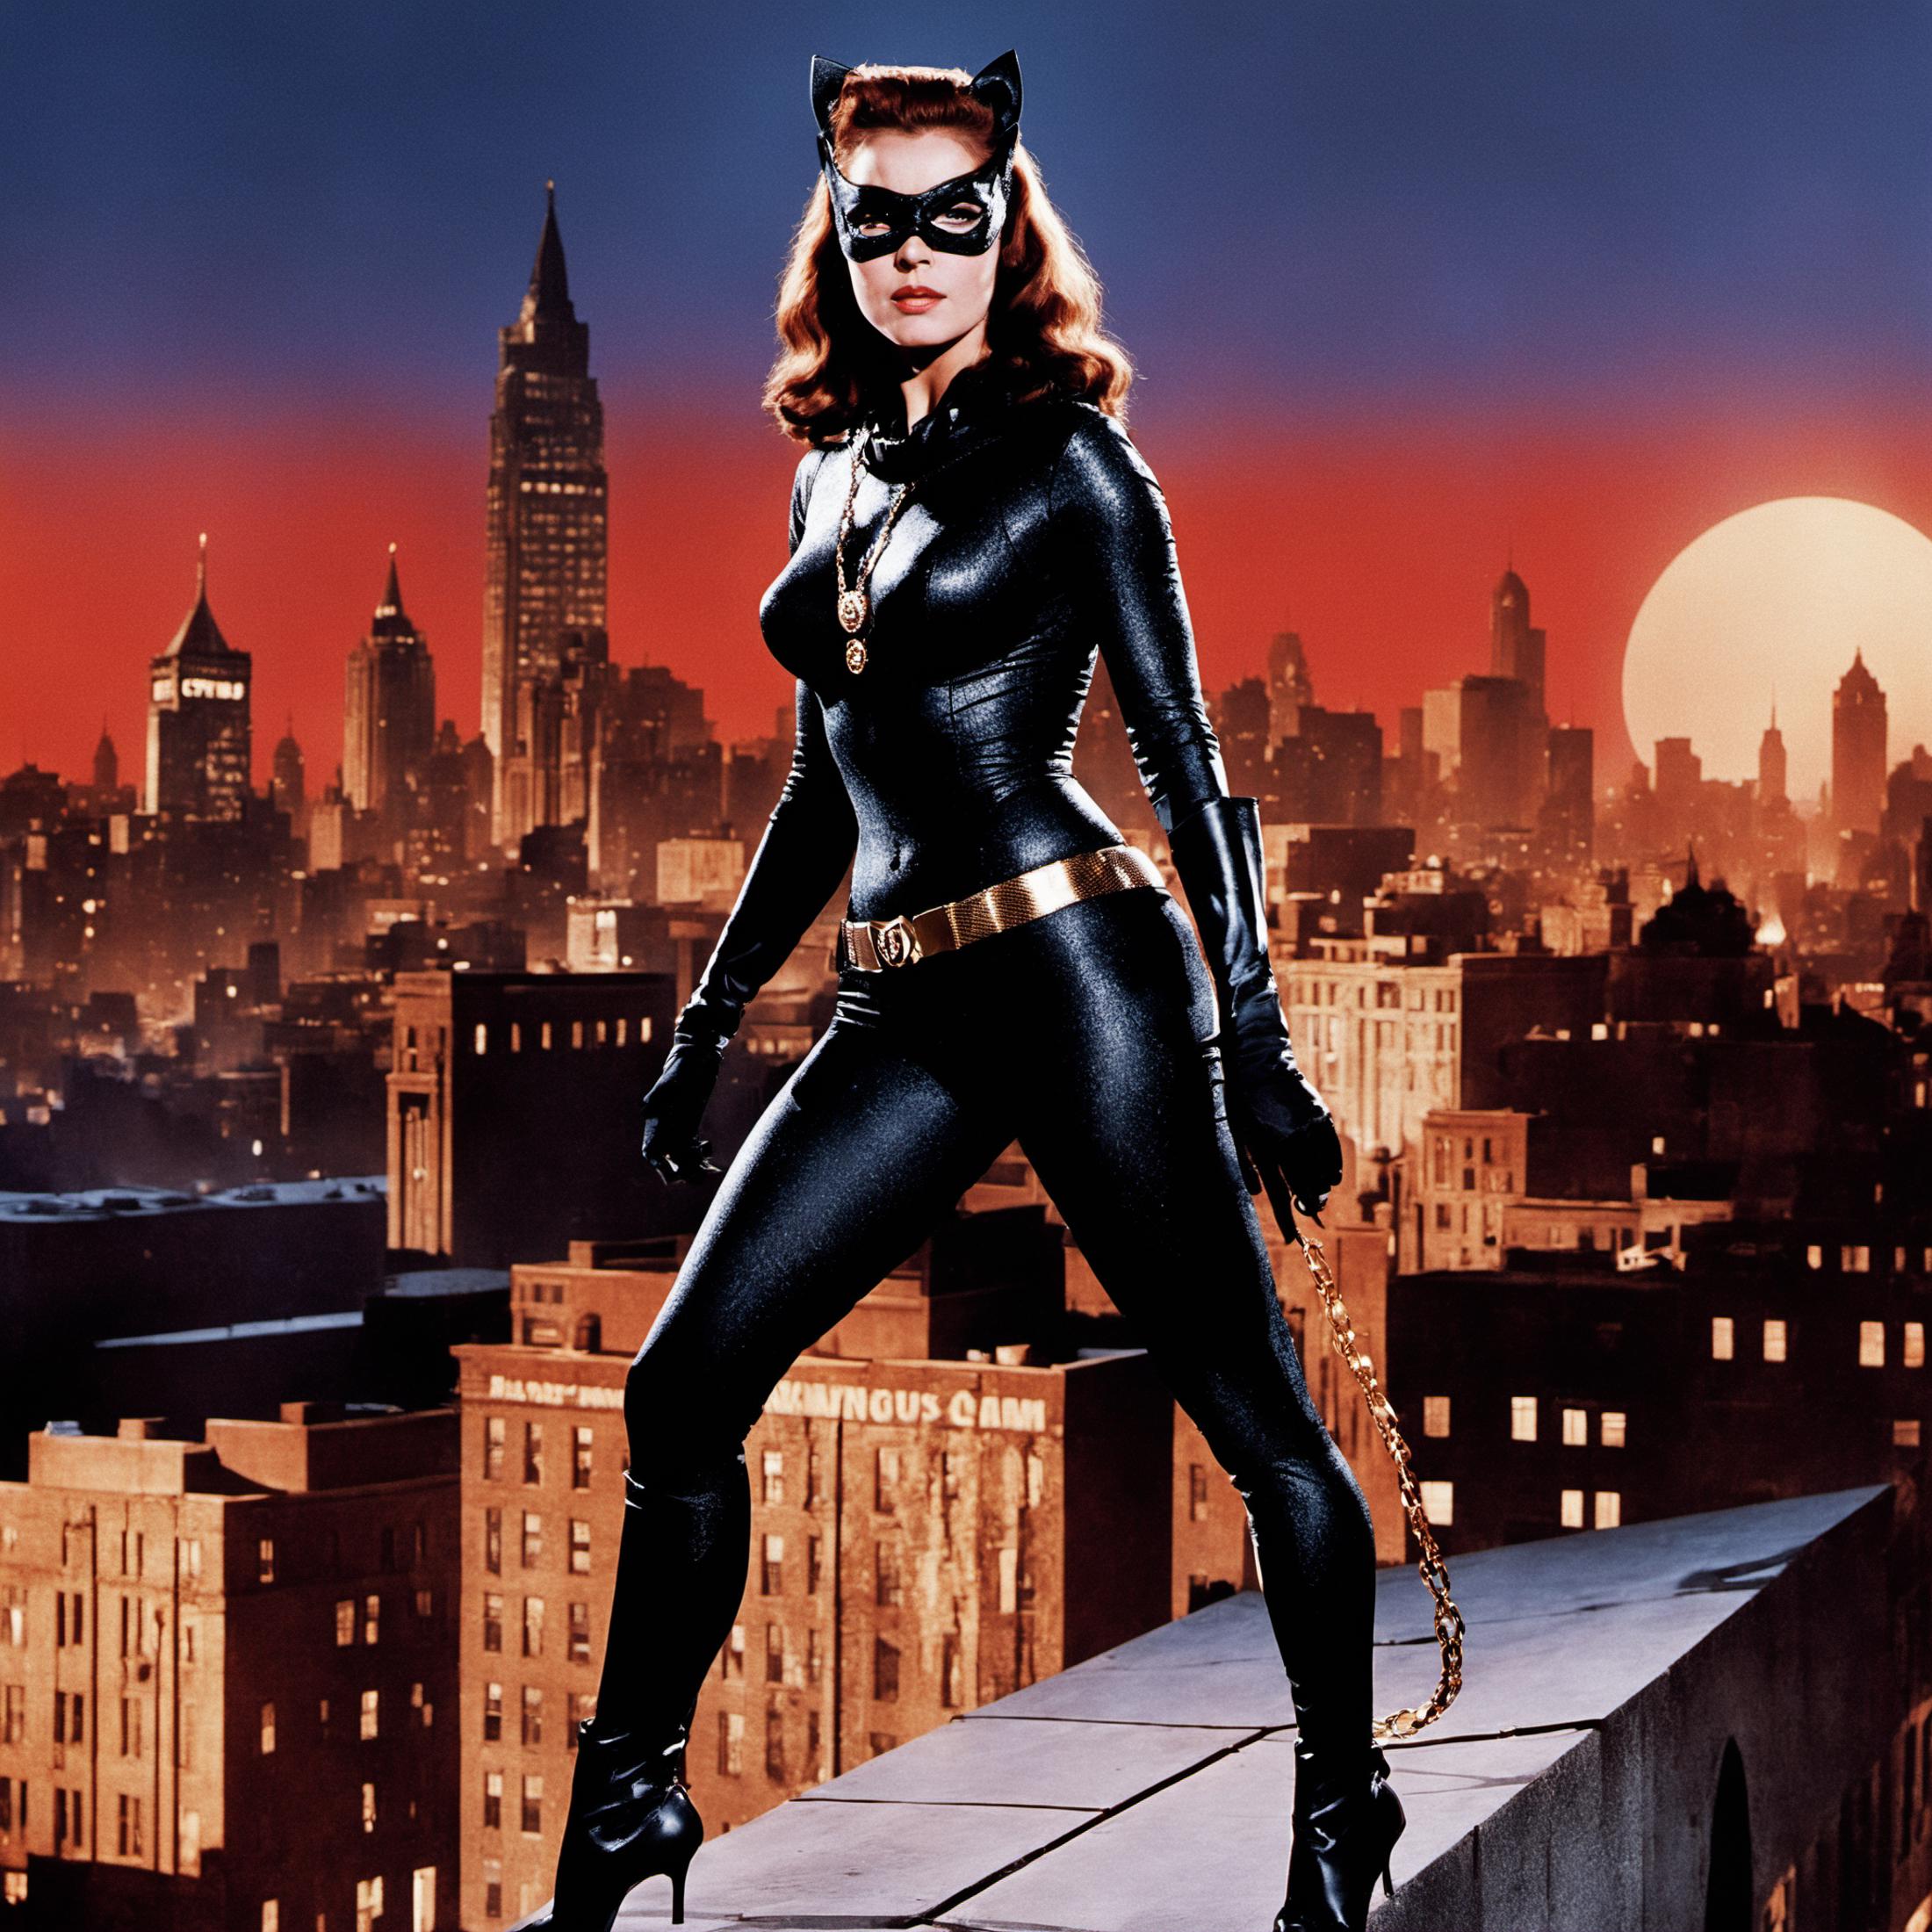 Julie Newmar Catwoman image by thesilvermoth